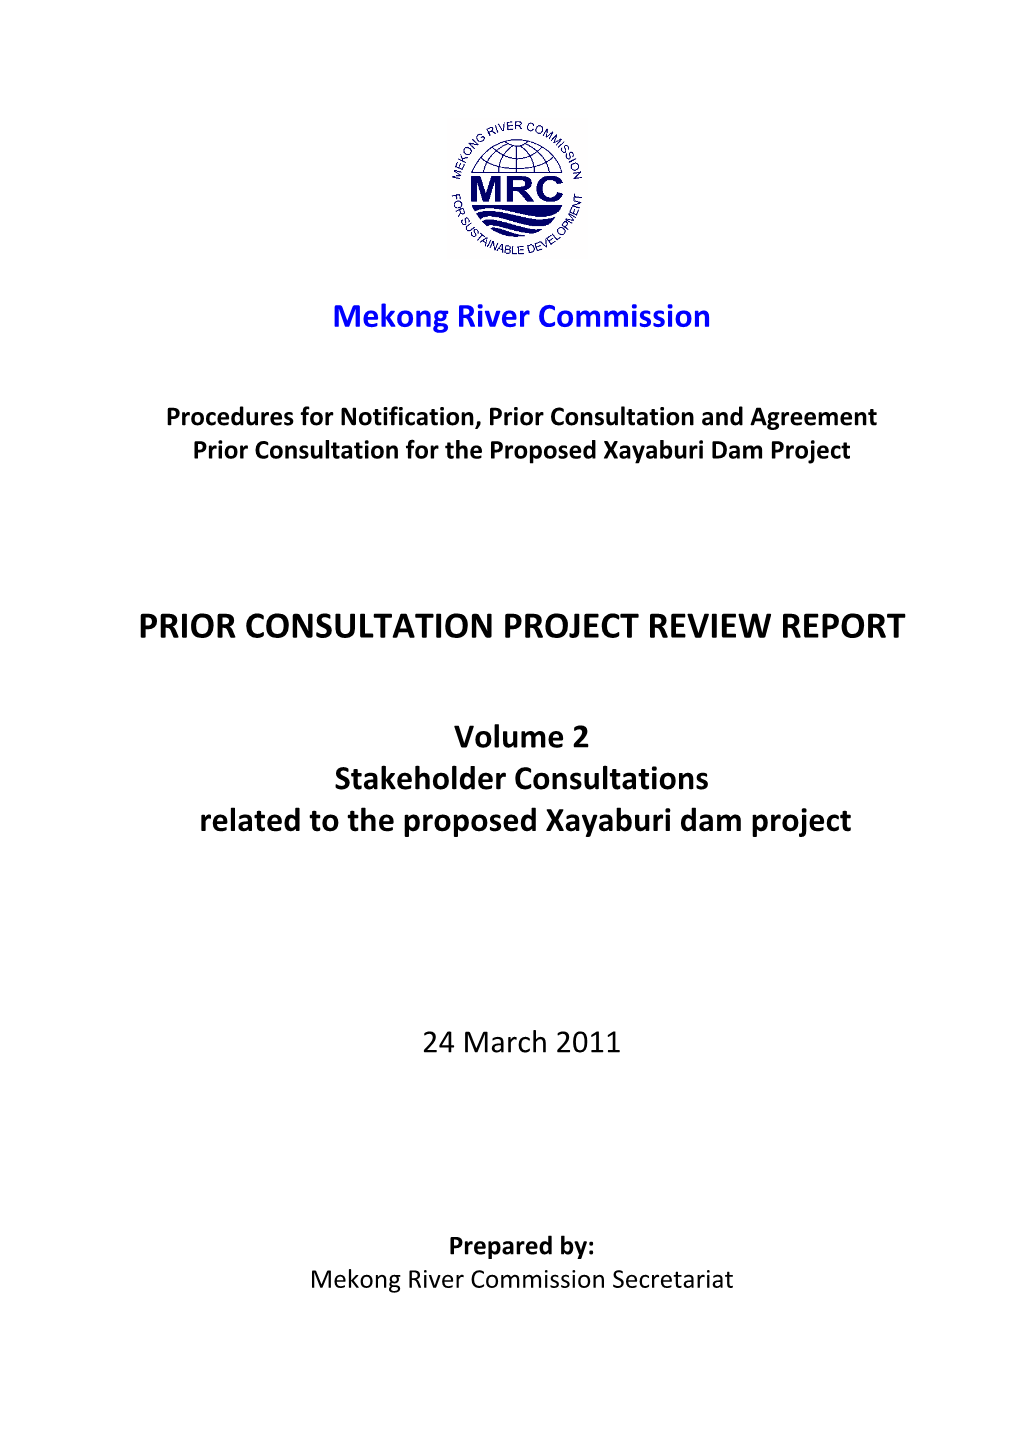 Prior Consultation Project Review Report